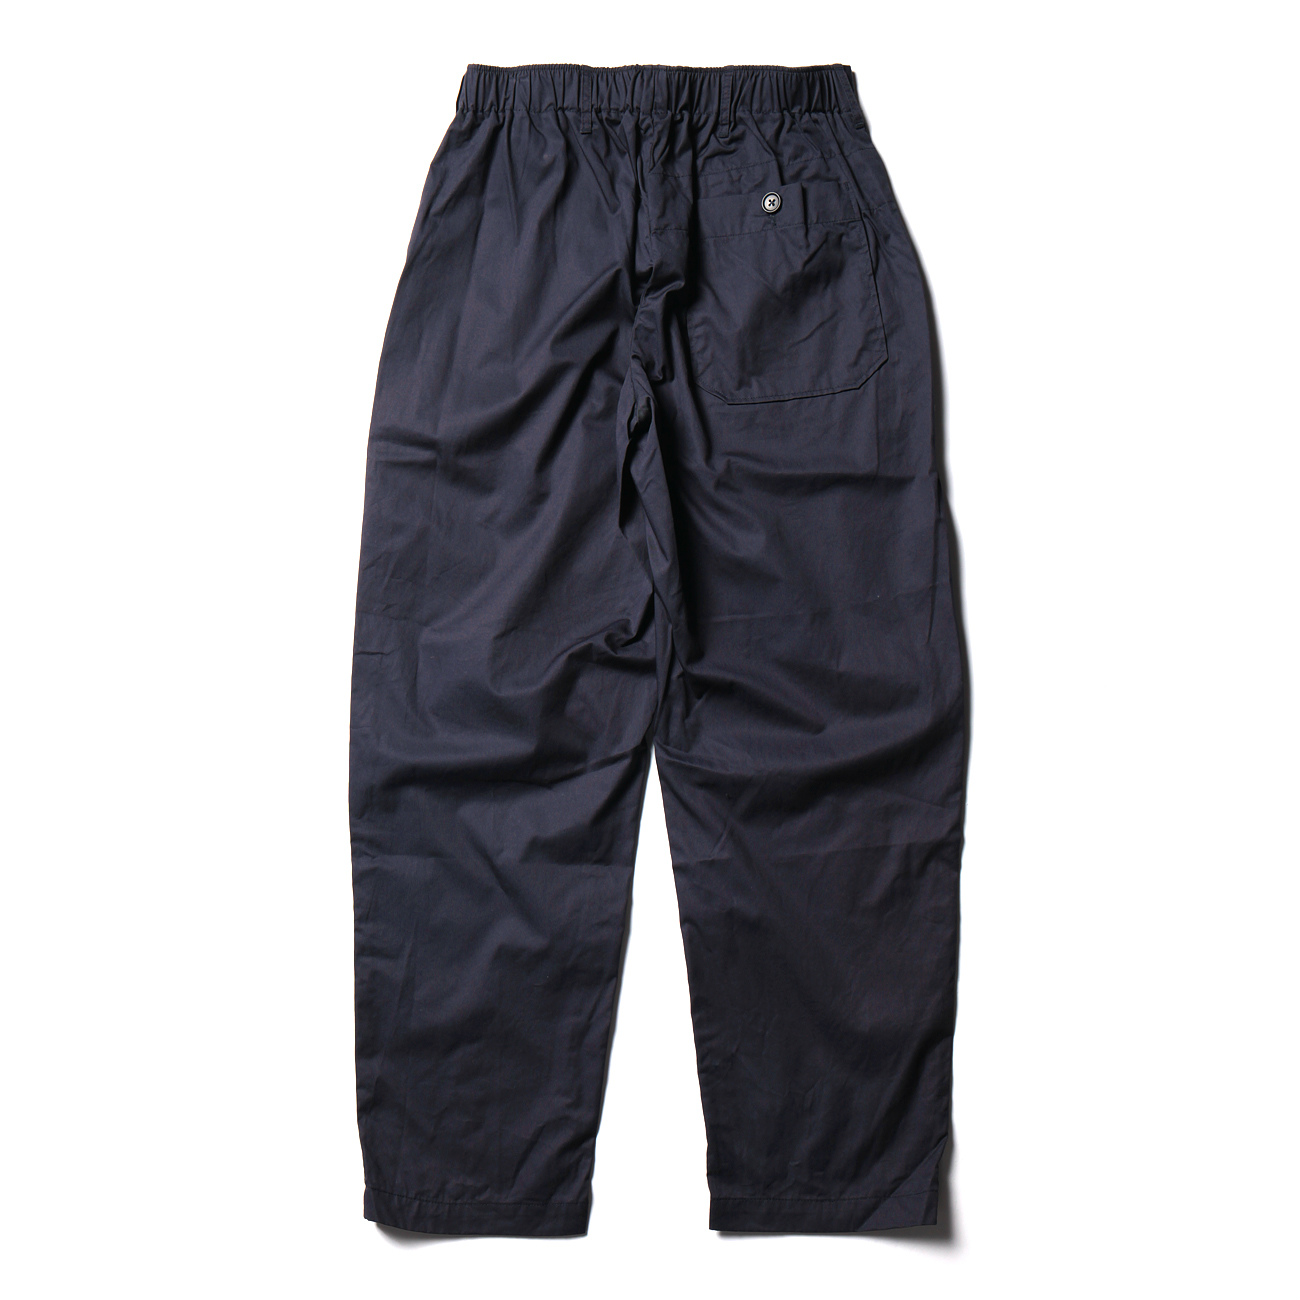 Emerson Pant - High Count Twill - Dk.Navy